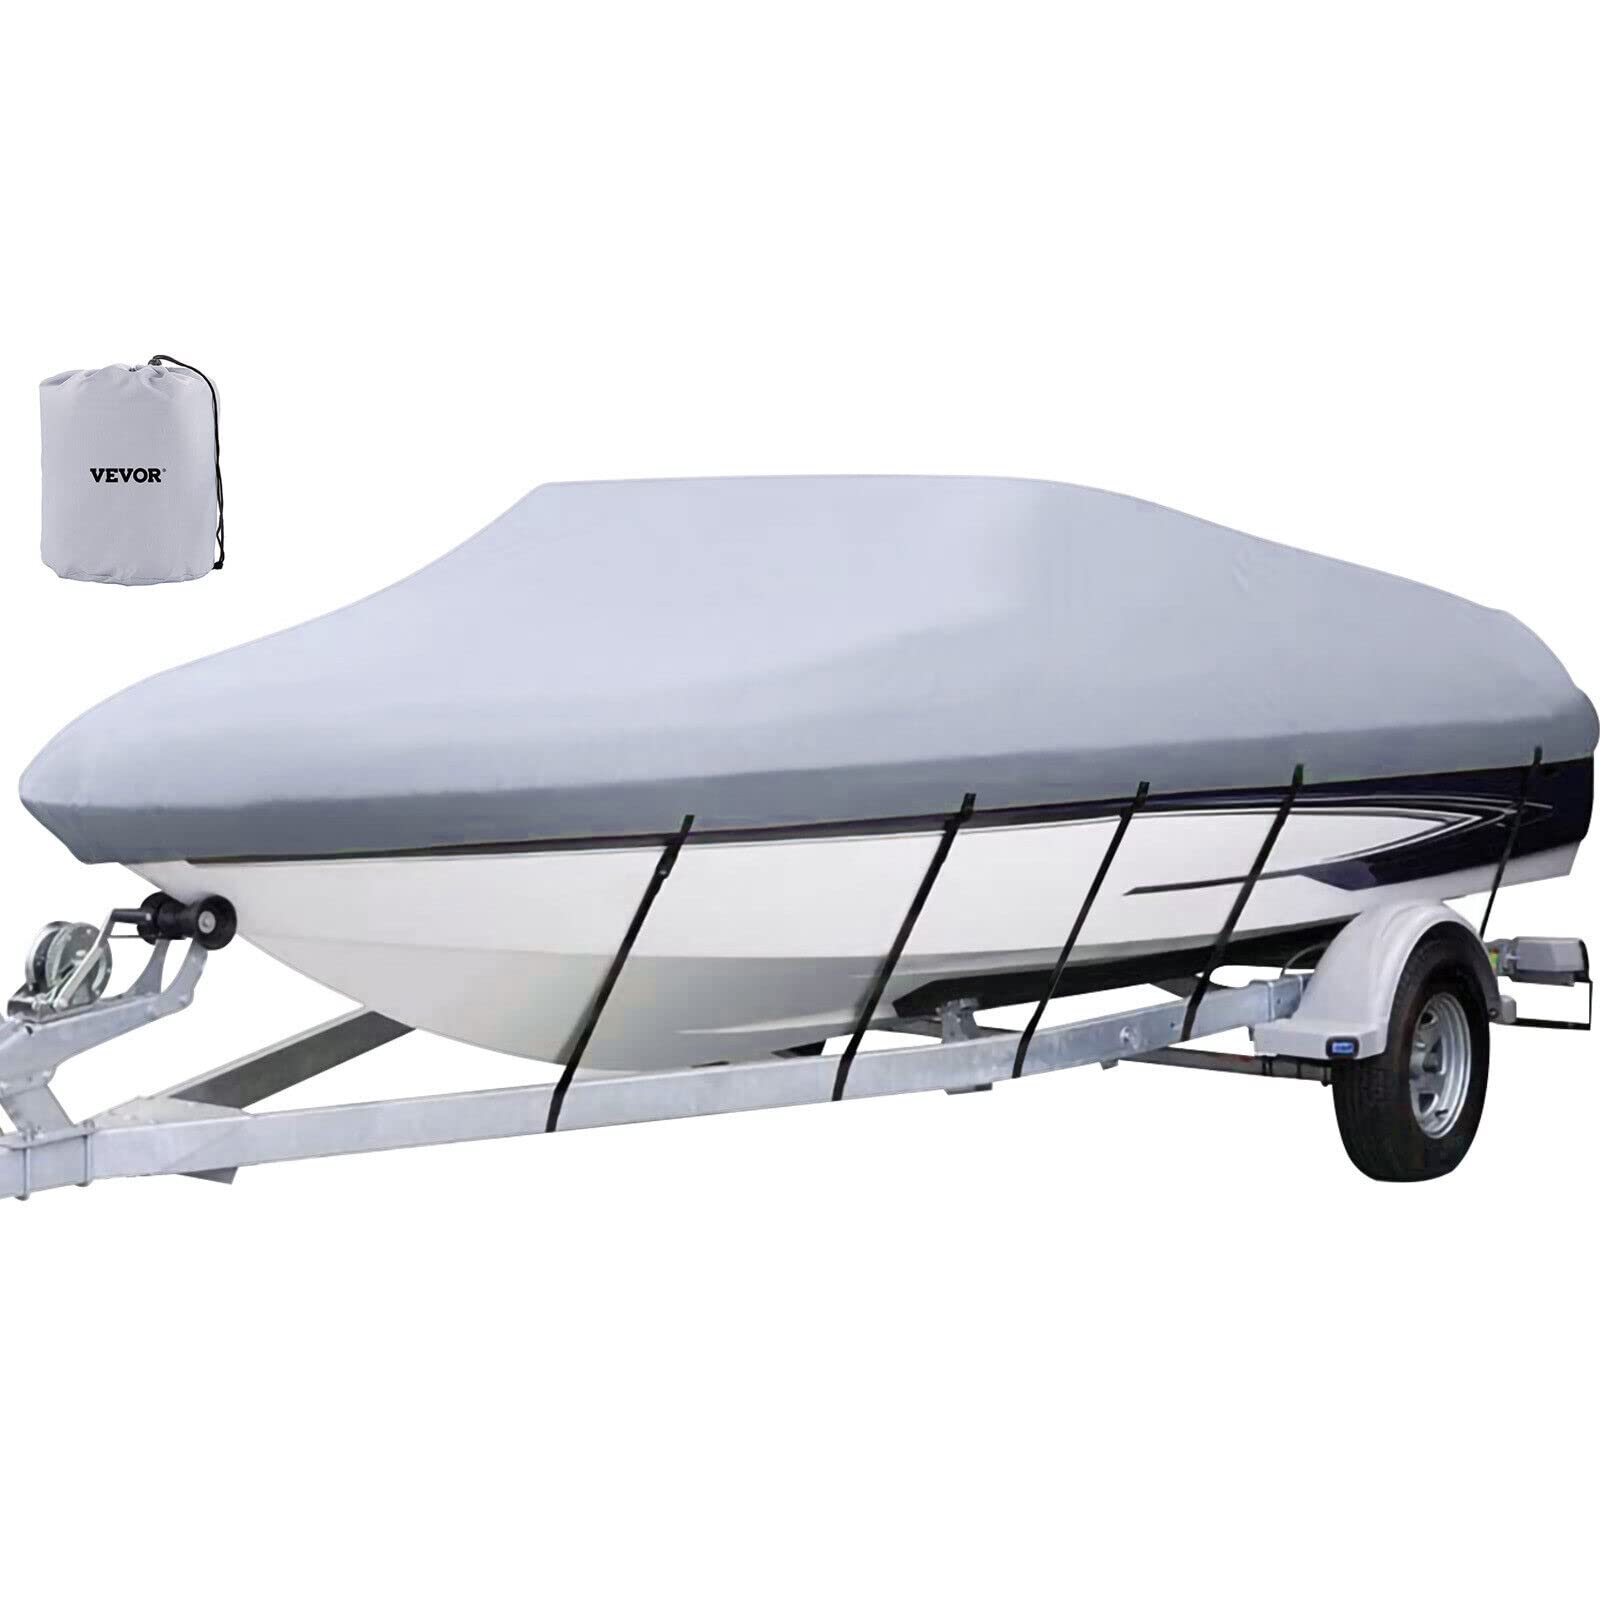 VEVOR wasserdichte Schutzhülle, 17'-19' Trailerable Boat Cover, Beam Width up to 102' v Hull Cover Heavy Duty 600D Marine Grade Polyester Mooring Cover for Fits V-Hull Boat with 5 Tightening Straps von VEVOR